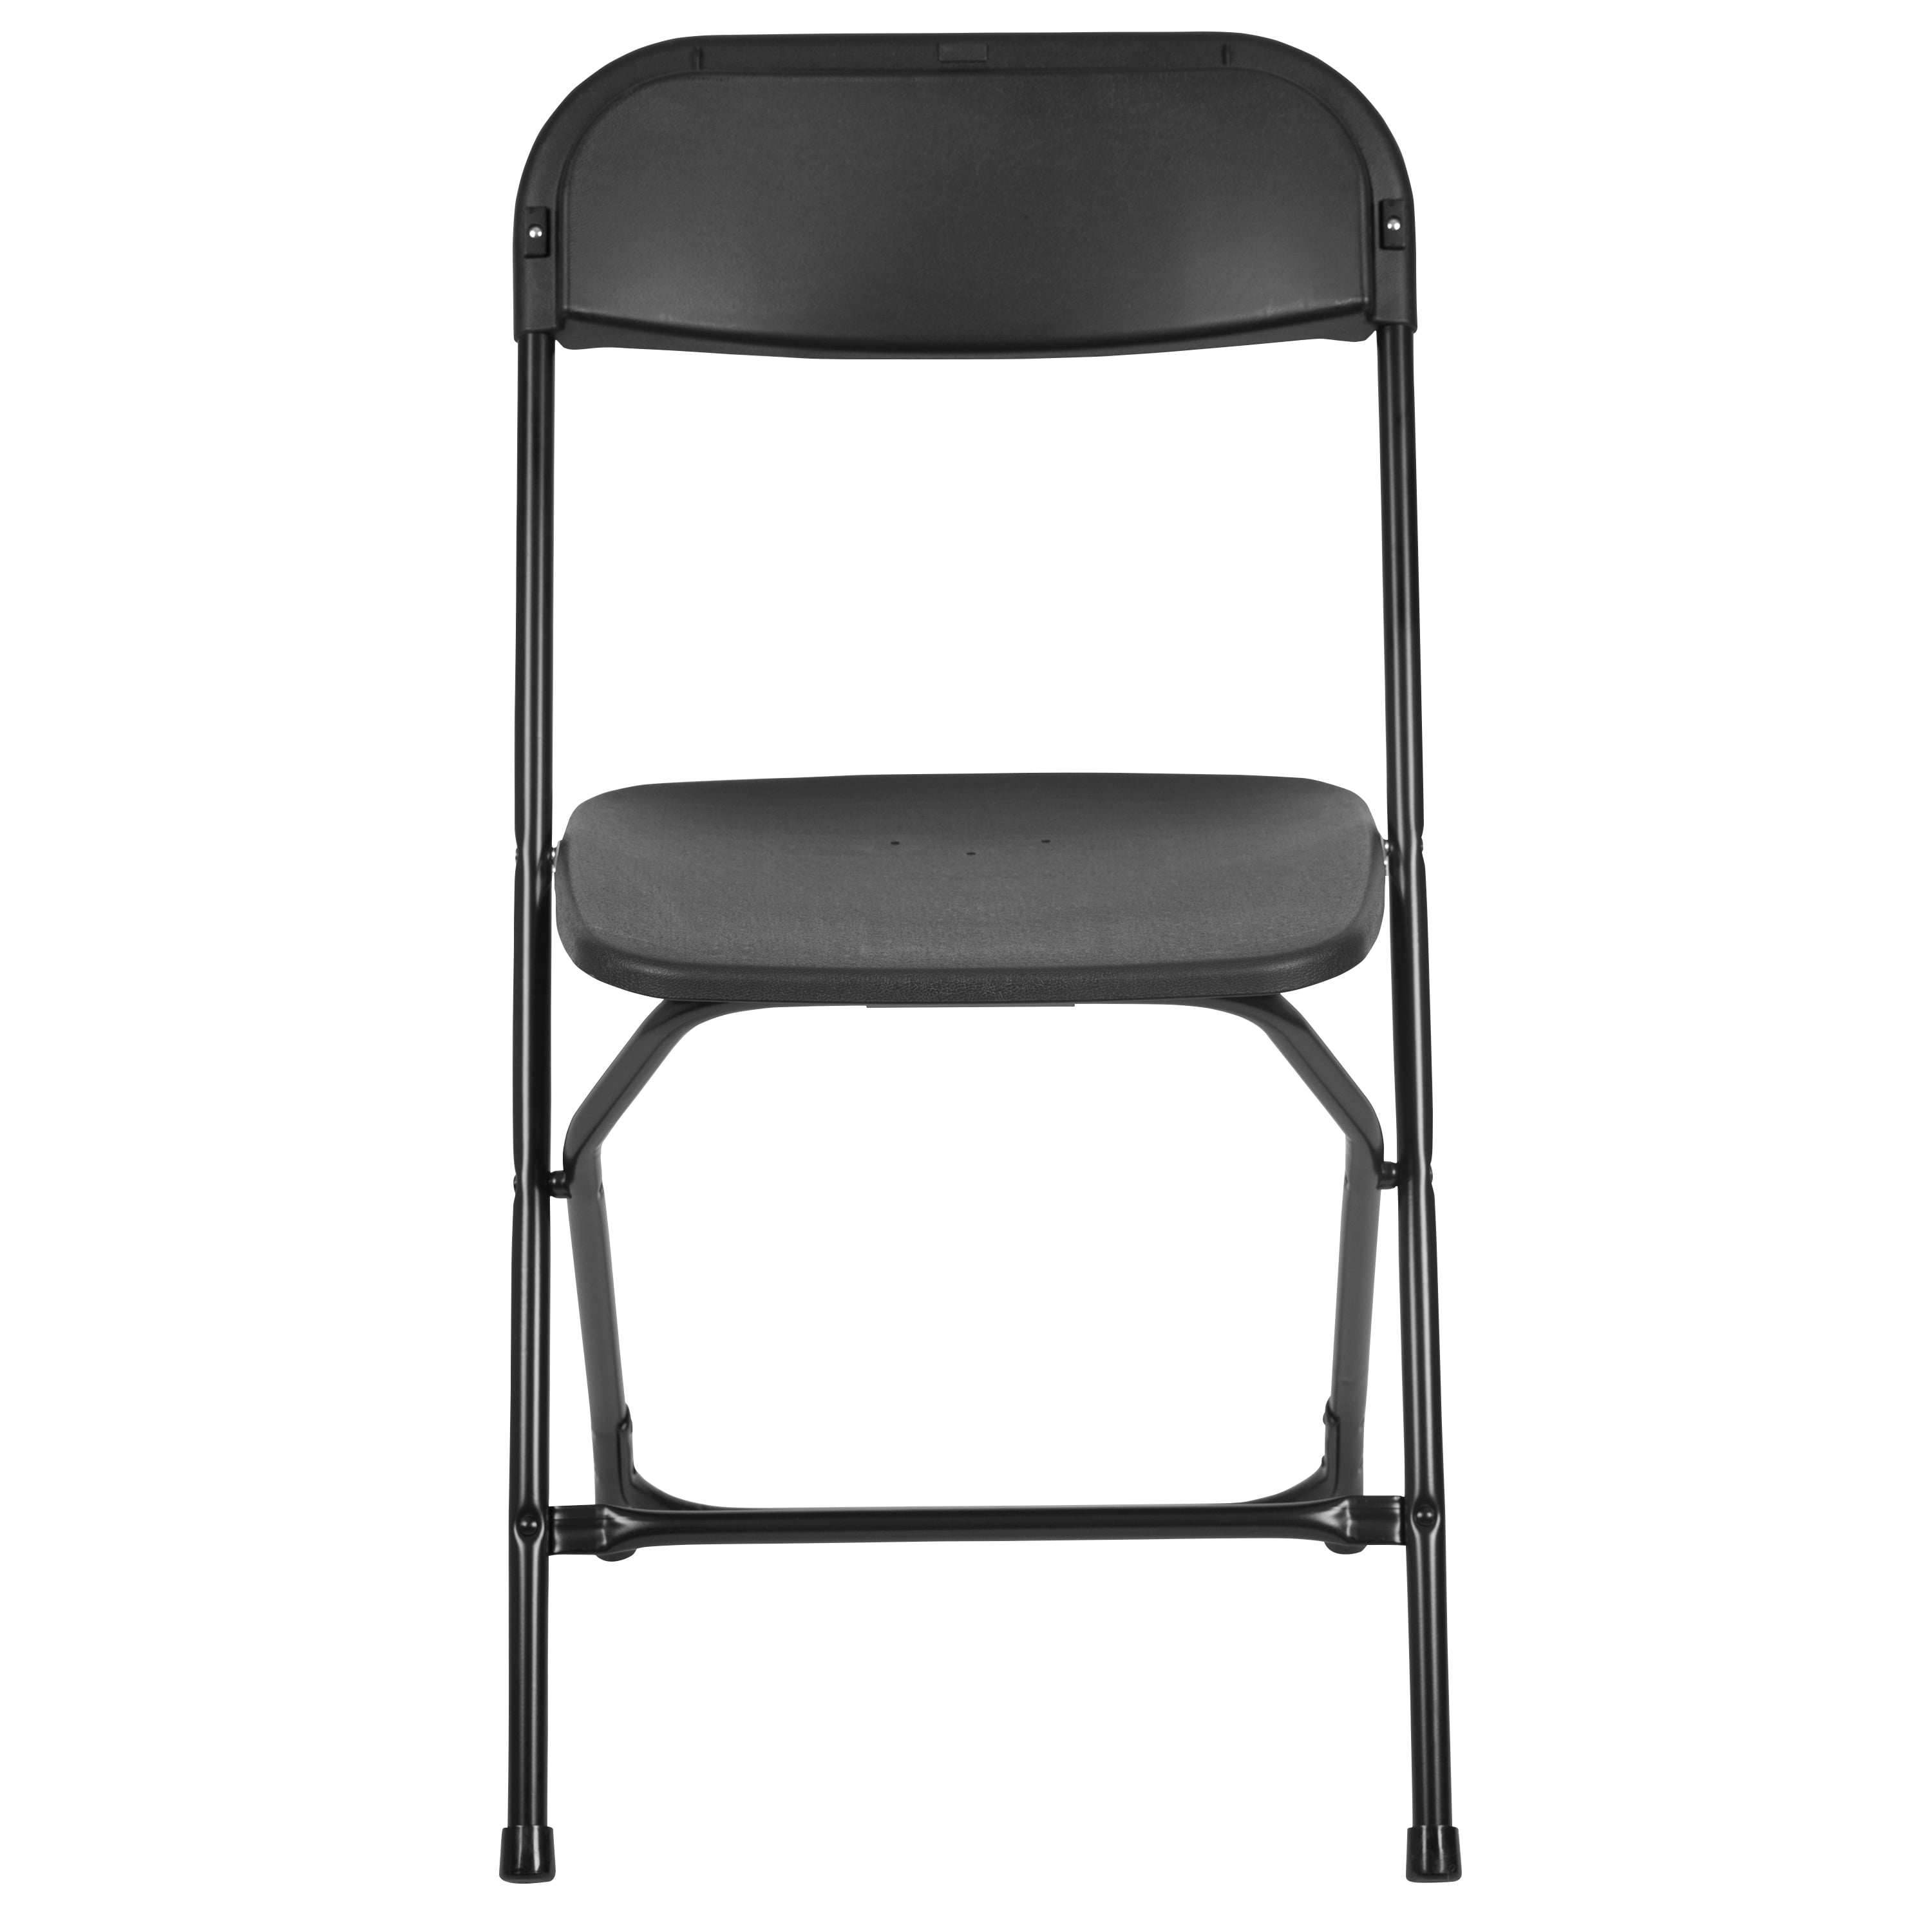 650 Lbs Weight Capacity Commercial Quality Black Plastic Folding Chair 